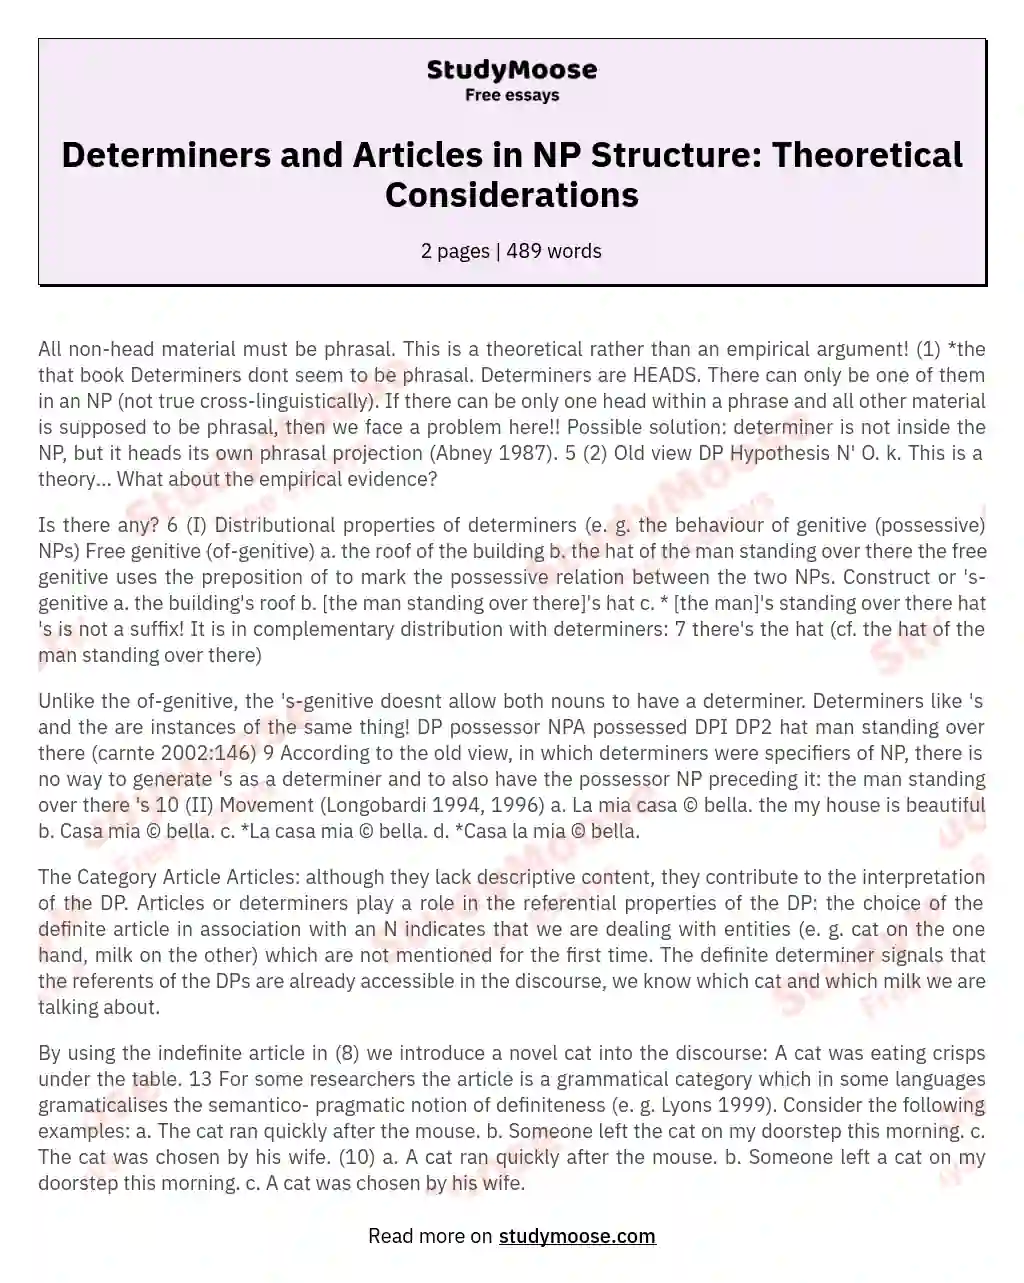 Determiners and Articles in NP Structure: Theoretical Considerations essay